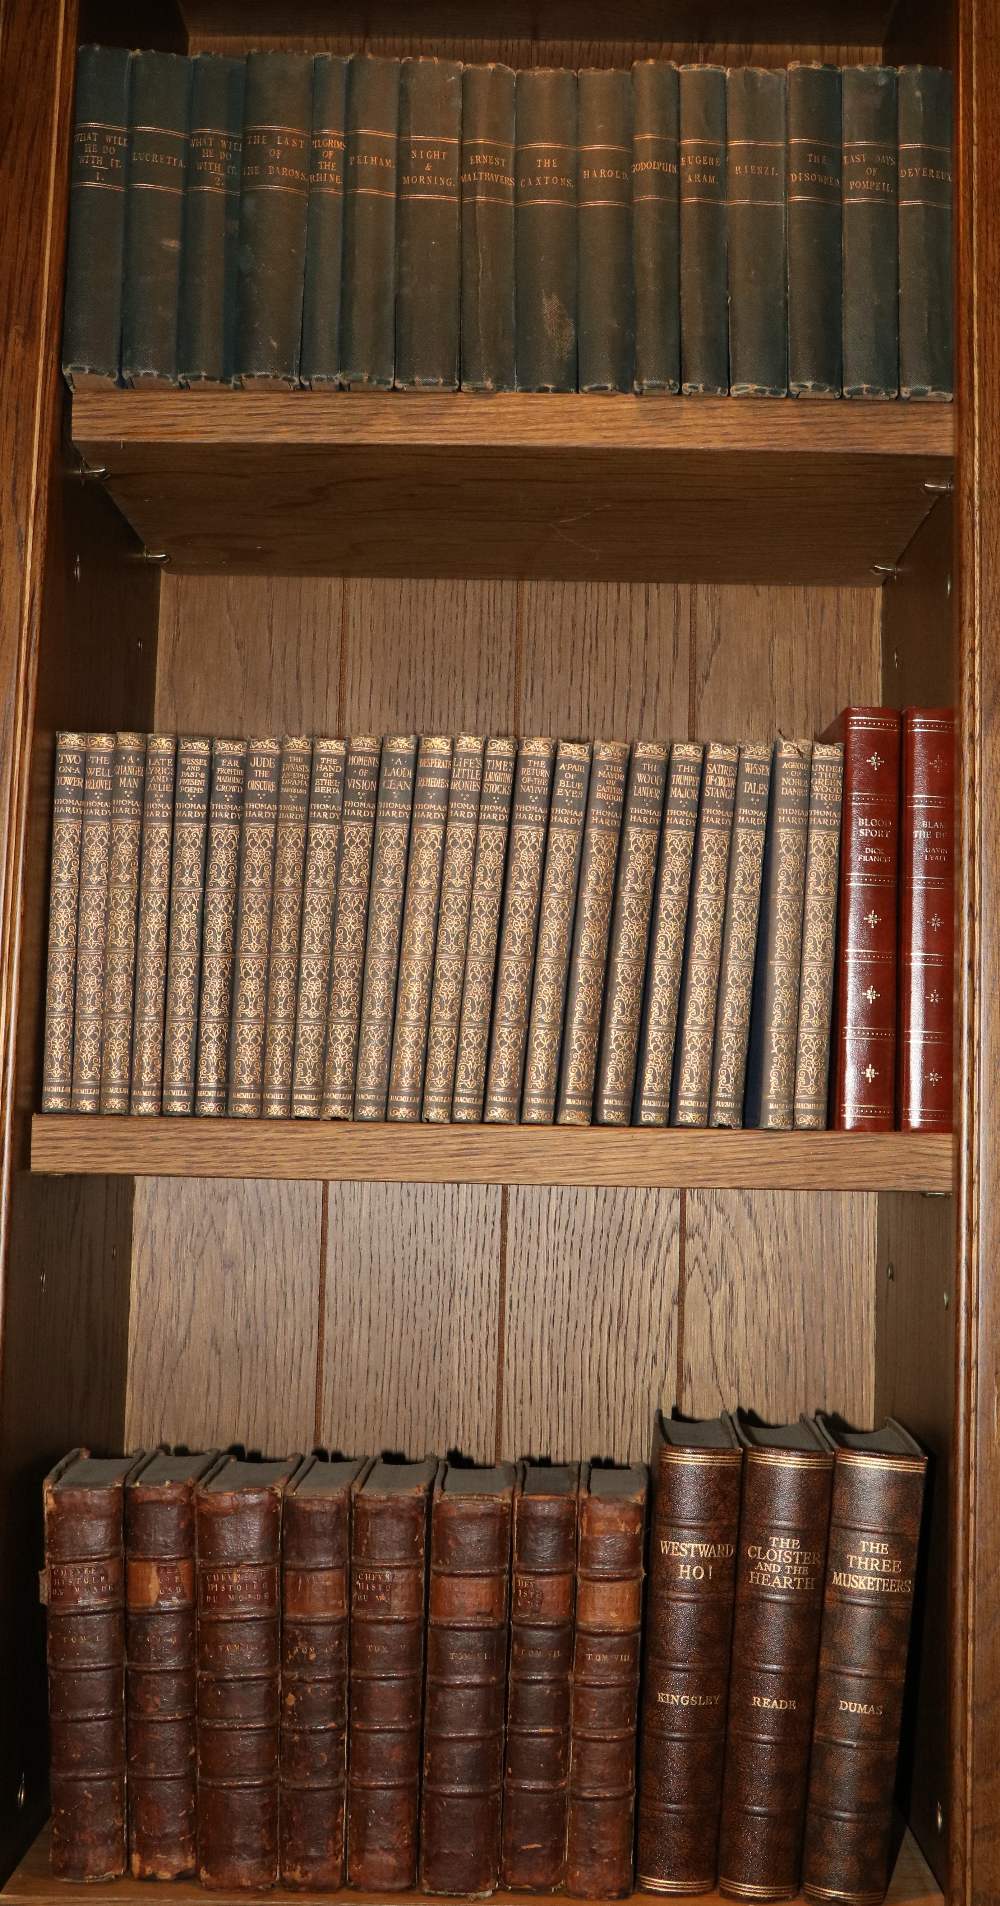 General Books: Some antiquarian leather bound Volumes, some modern books on Art, Antiques, Horse